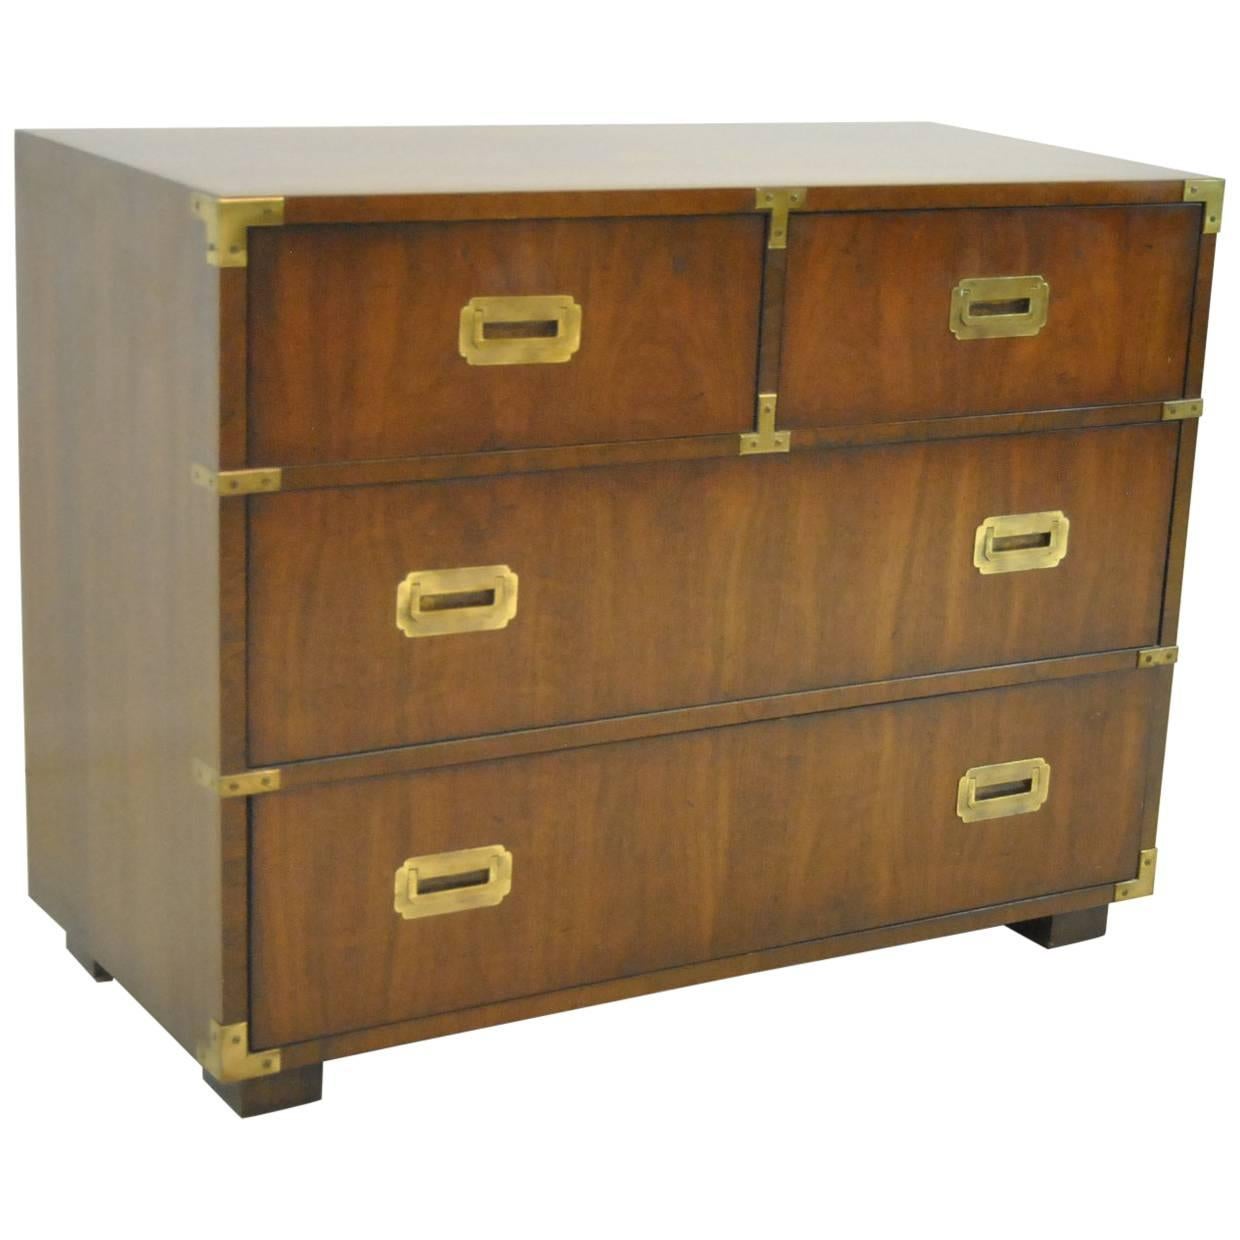 Campaign Style Four-Drawer Chest in Dark Walnut by Lane Furniture